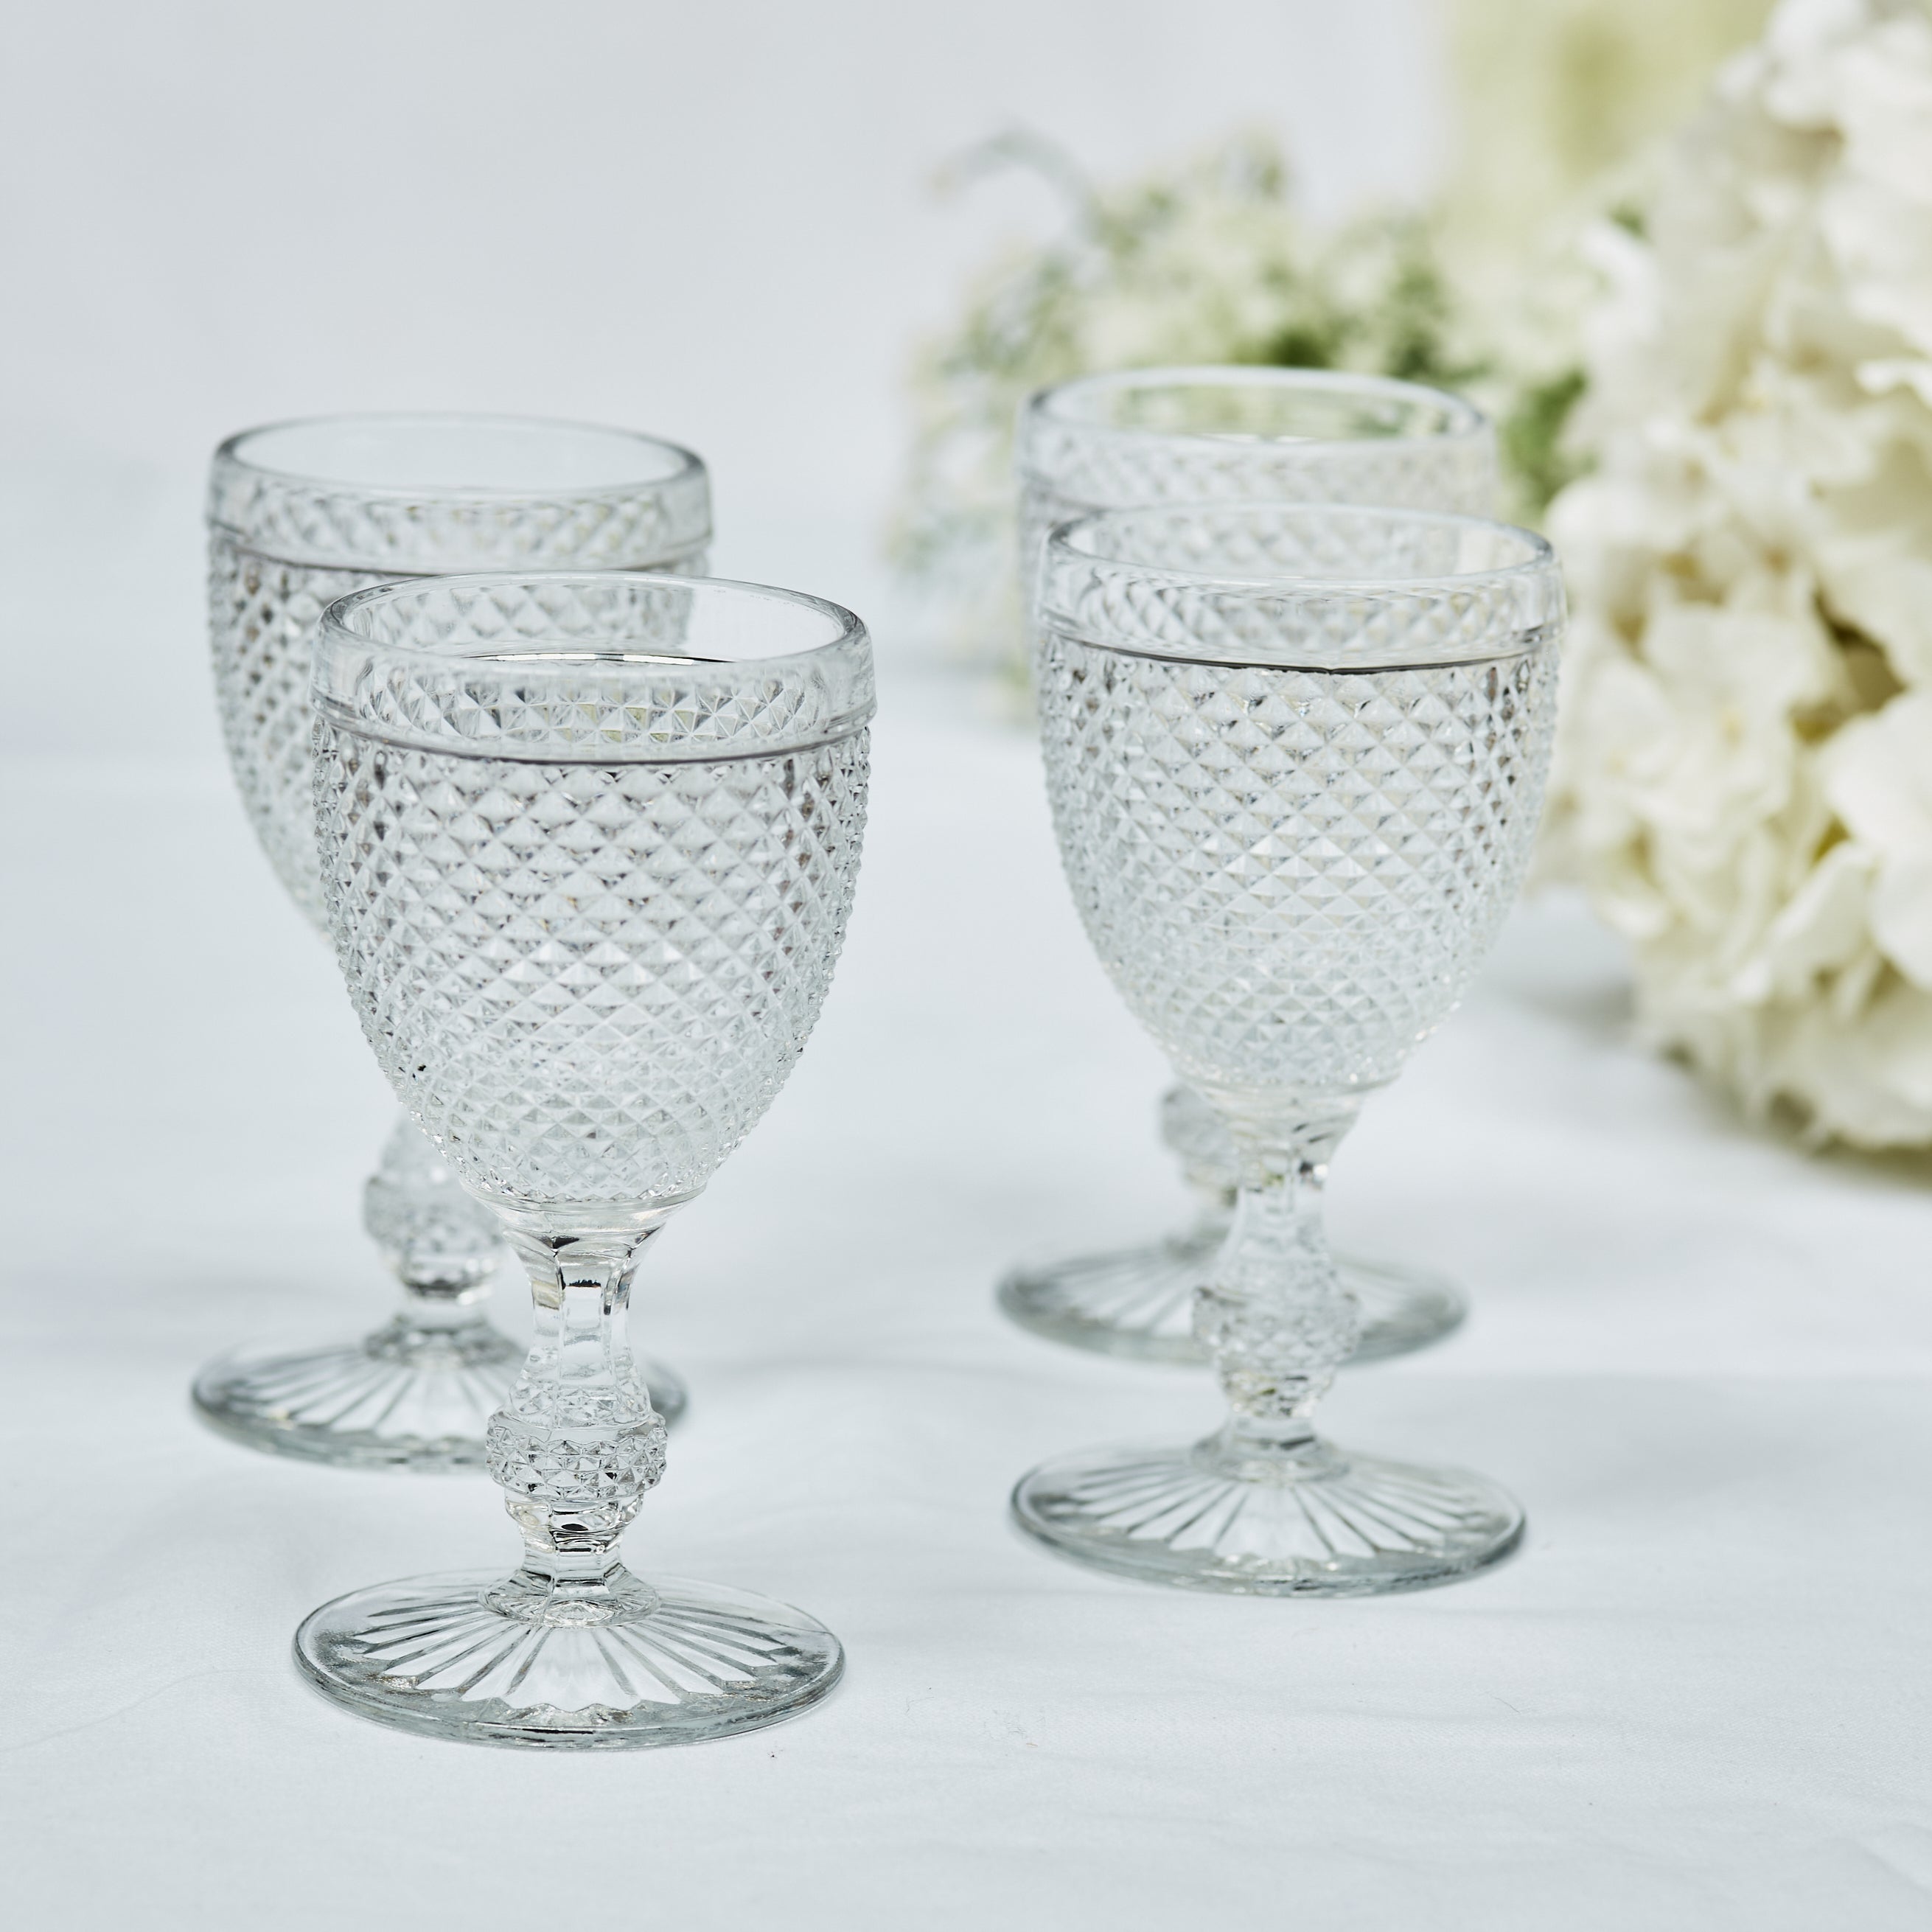 Small Vintage Wine Glass - Set of 4